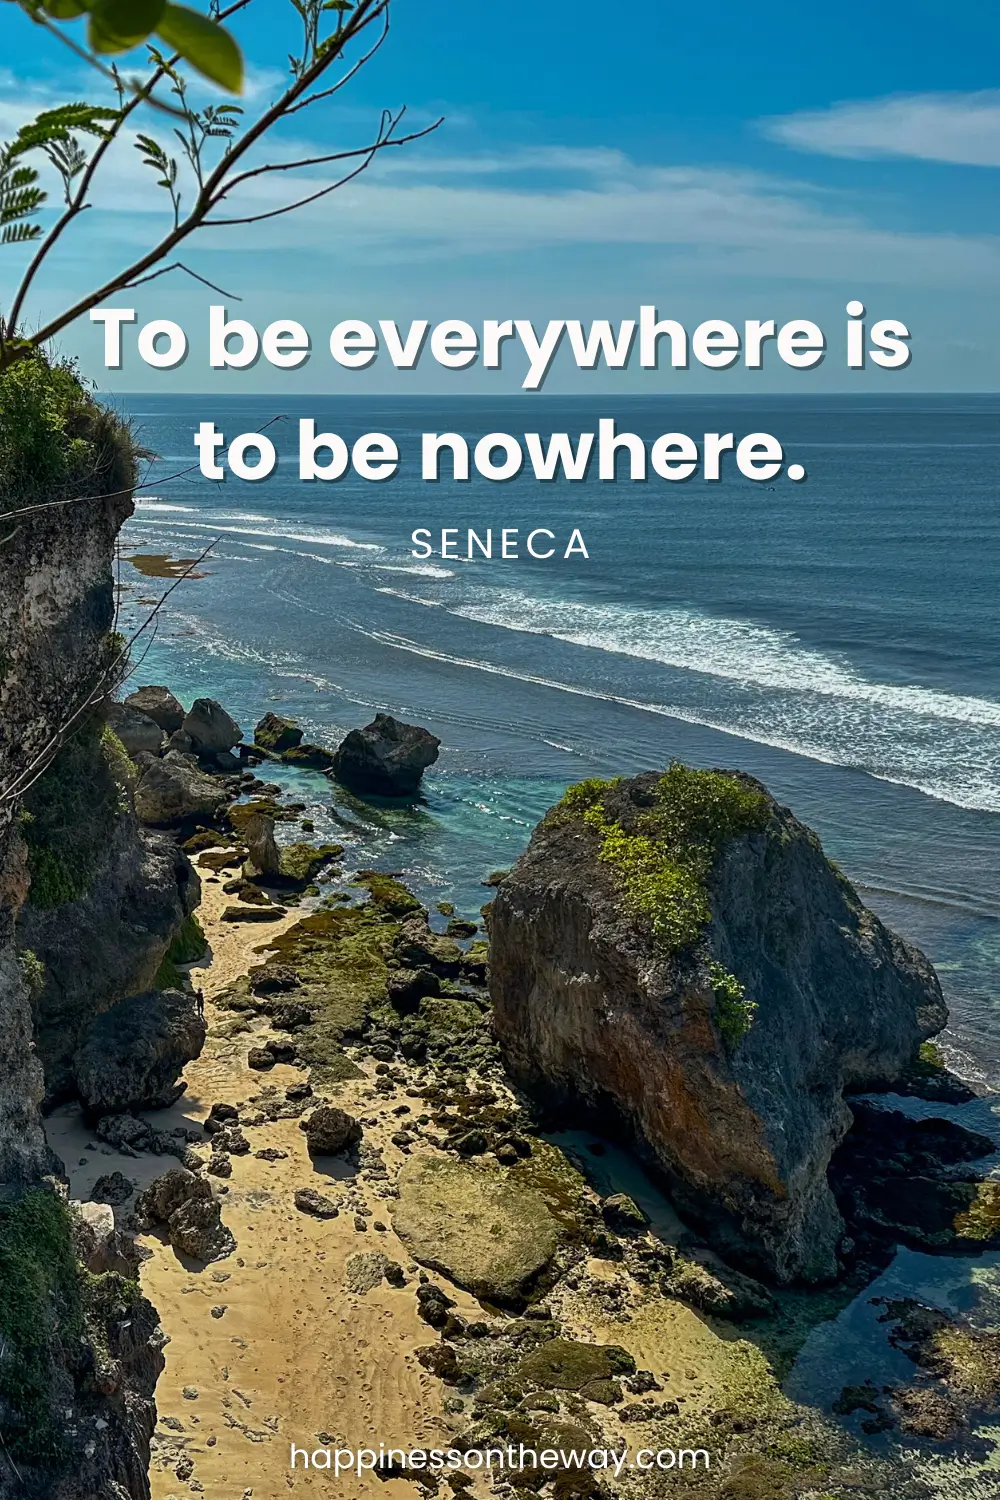 A secluded beach cove in Uluwatu Beach and clear blue waters, paired with the quote 'To be everywhere is to be nowhere. – Seneca